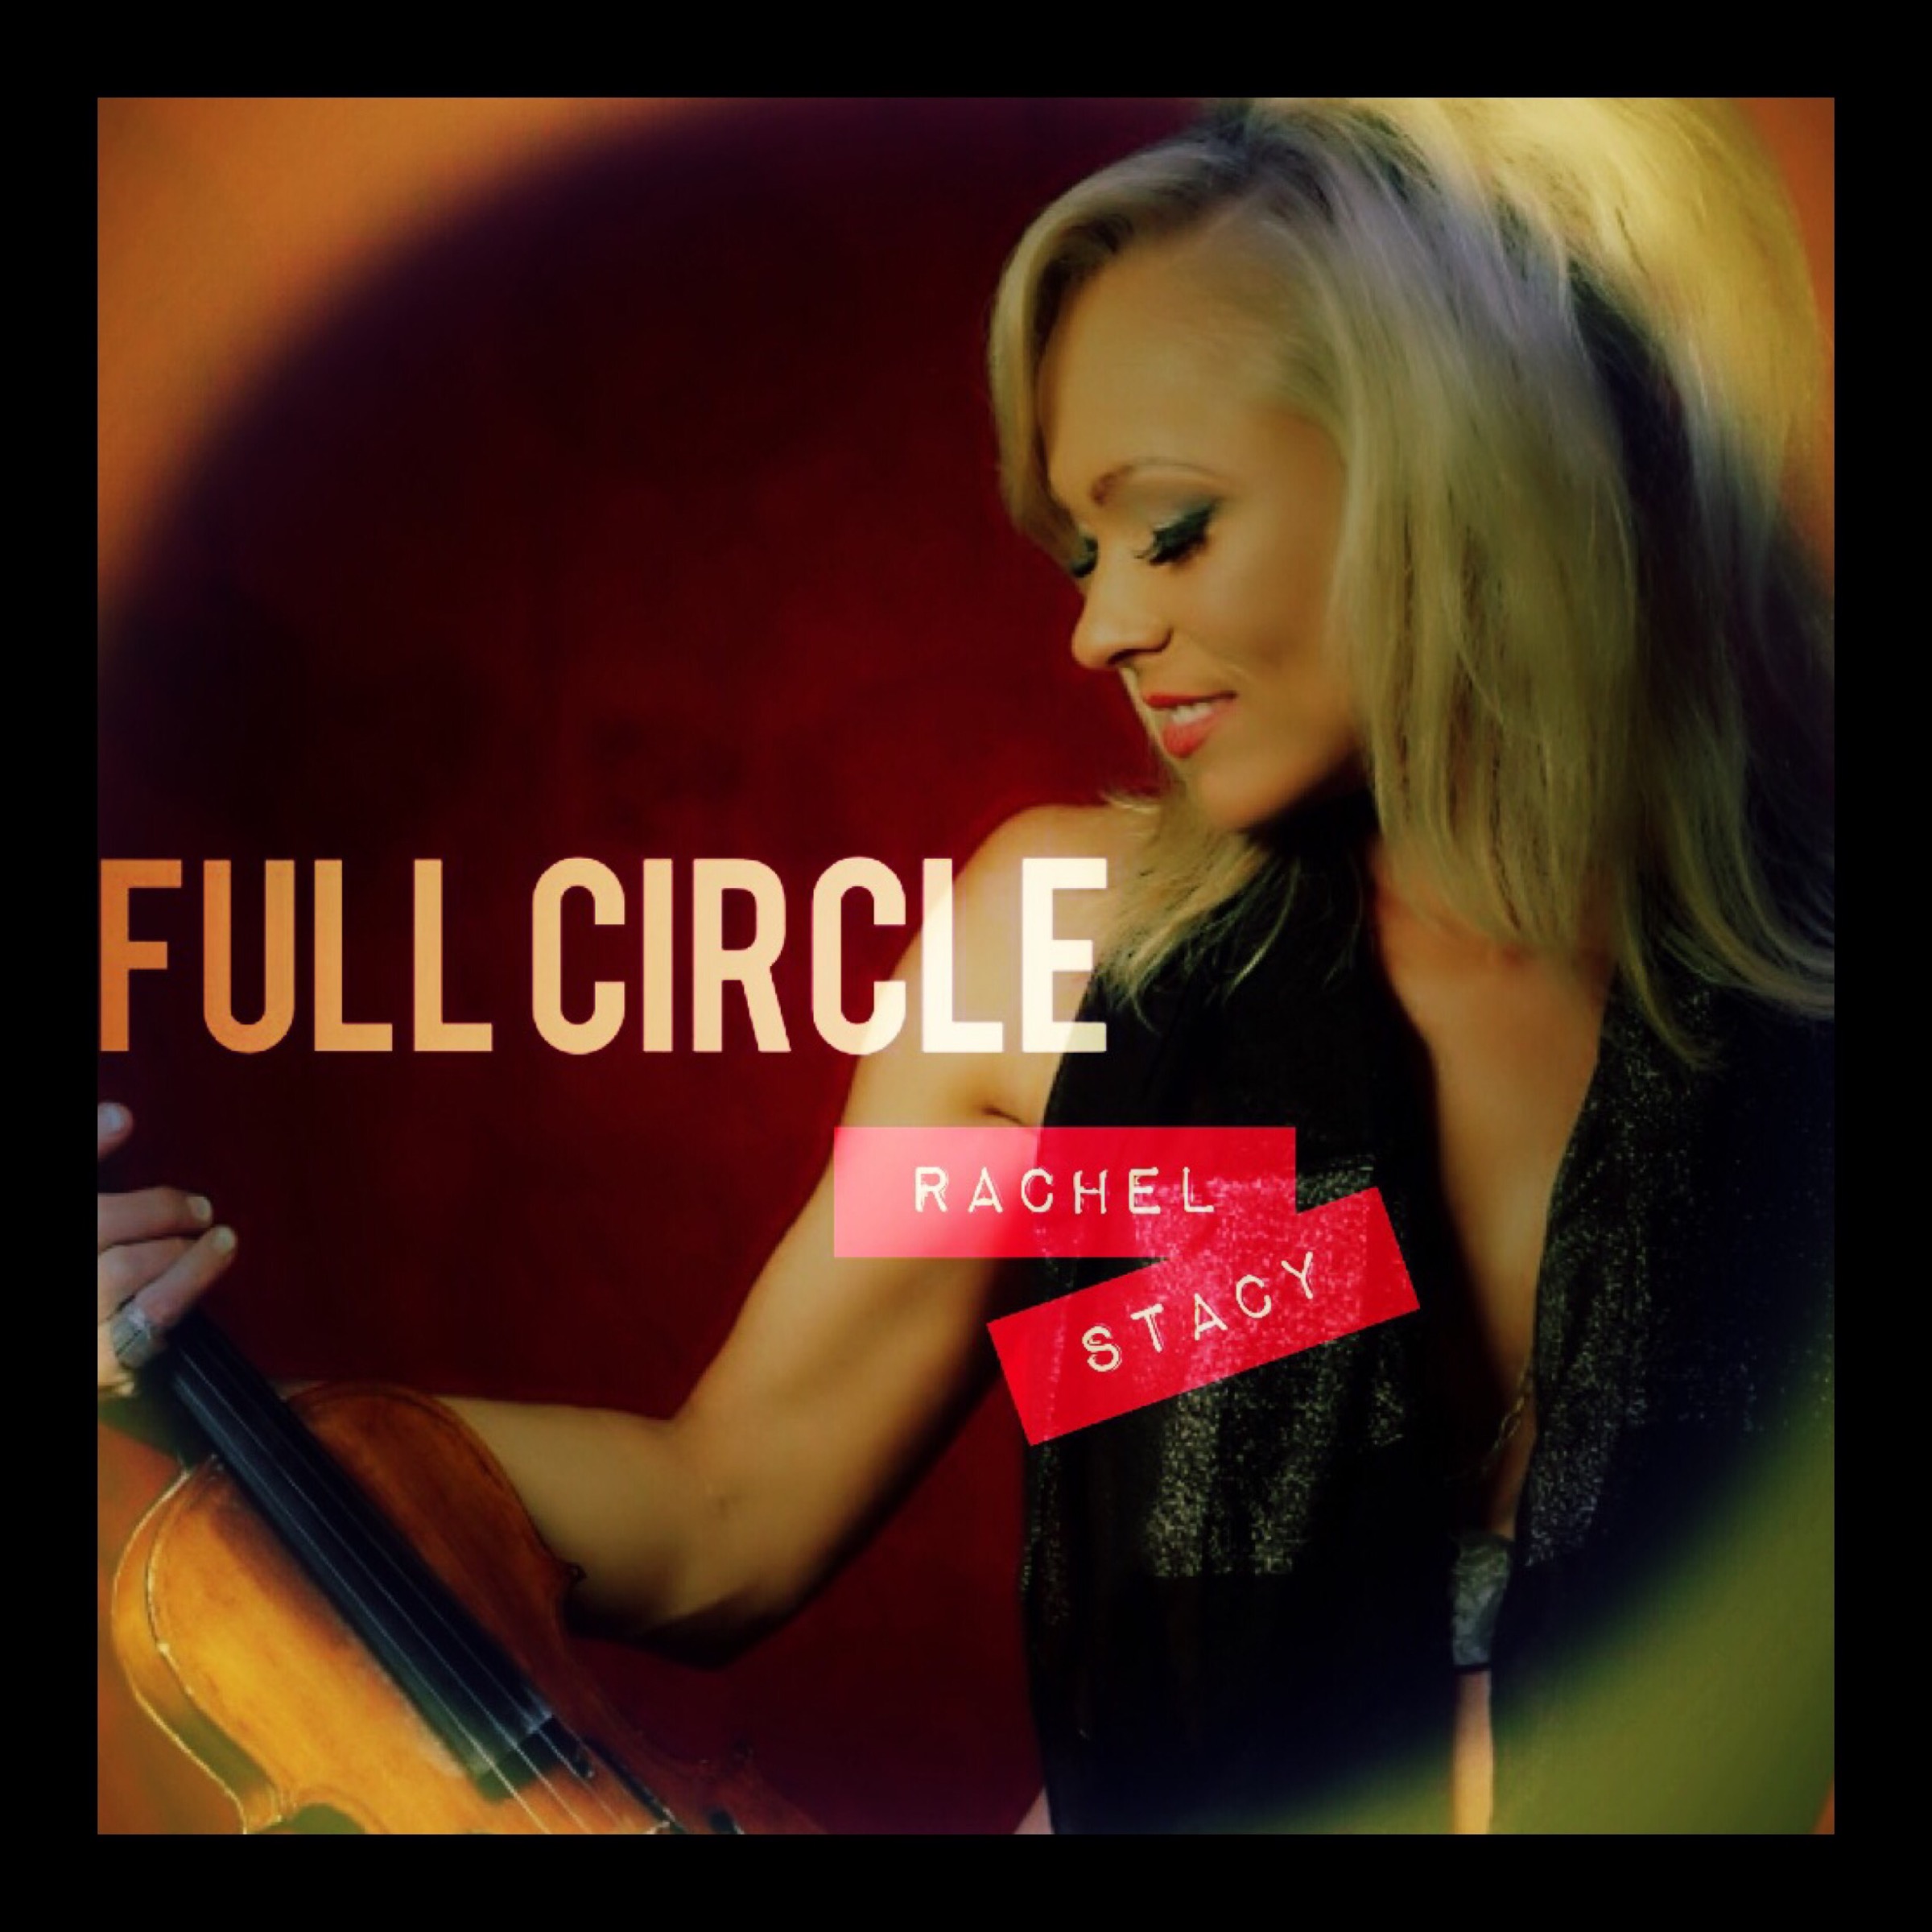 Full Circle by Rachel Stacy